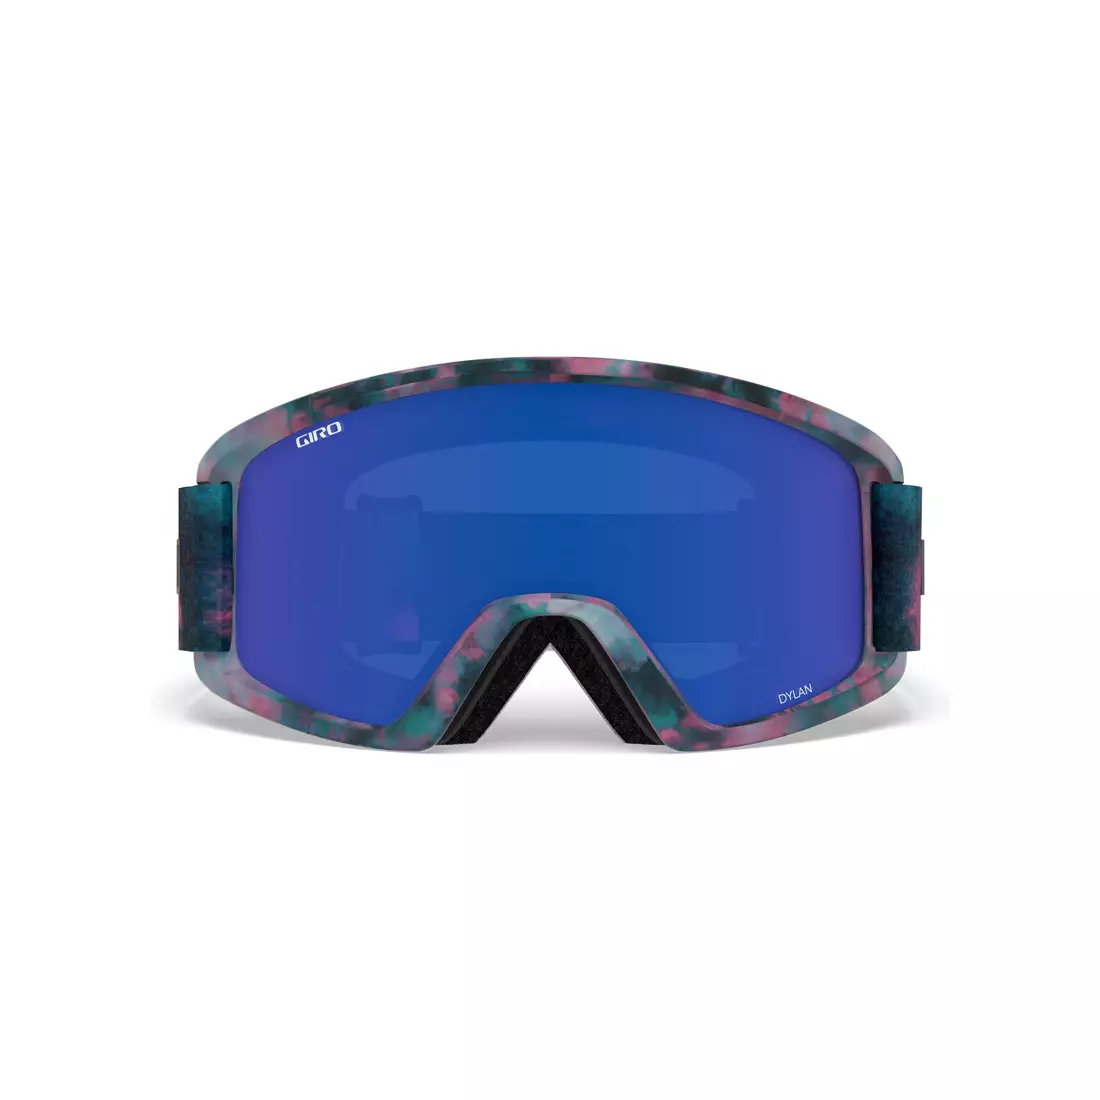 Ski / snowboard goggles GIRO DYLAN BLEACHED OUT GR-7094556